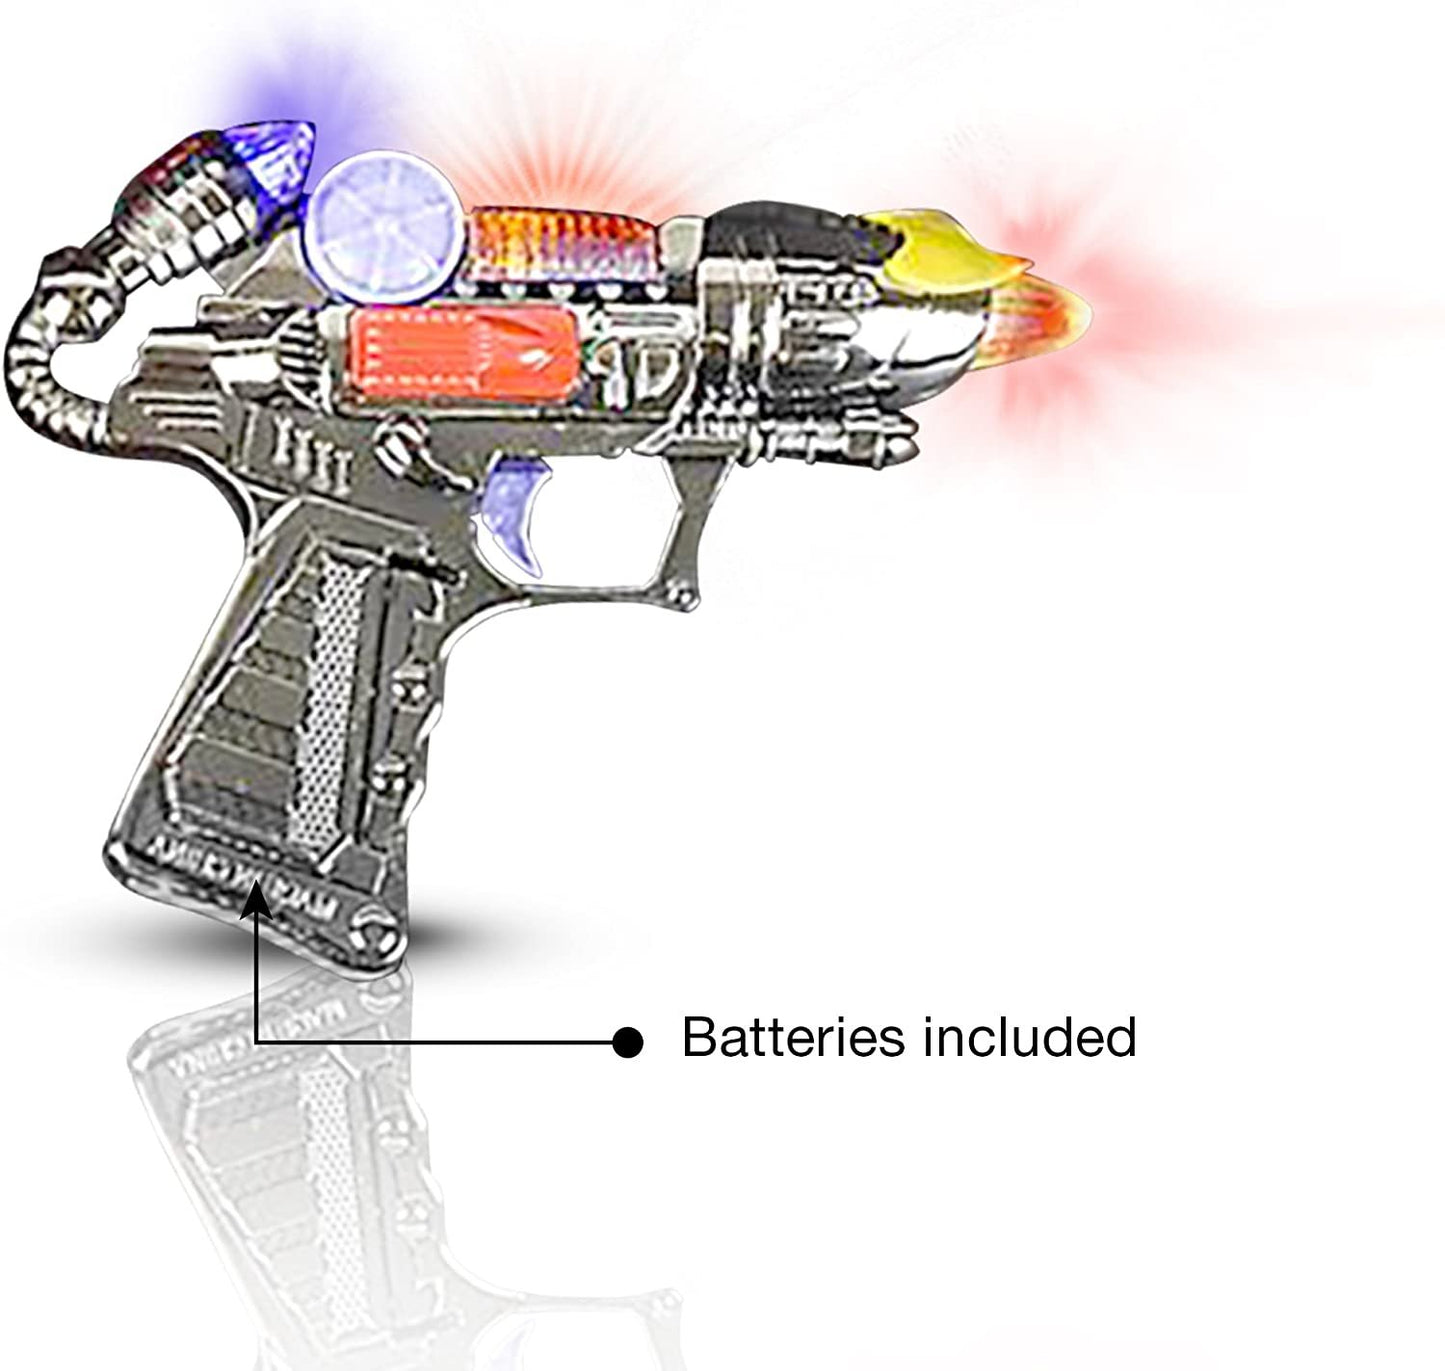 Ranger Hand-Gun Toy Set with Flashing Lights and Sounds by ArtCreativity, 6 Cool Futuristic Handguns, Pretend Play Toy Gun, Great Party Favor - Gift for Boys and Girls, Batteries Included